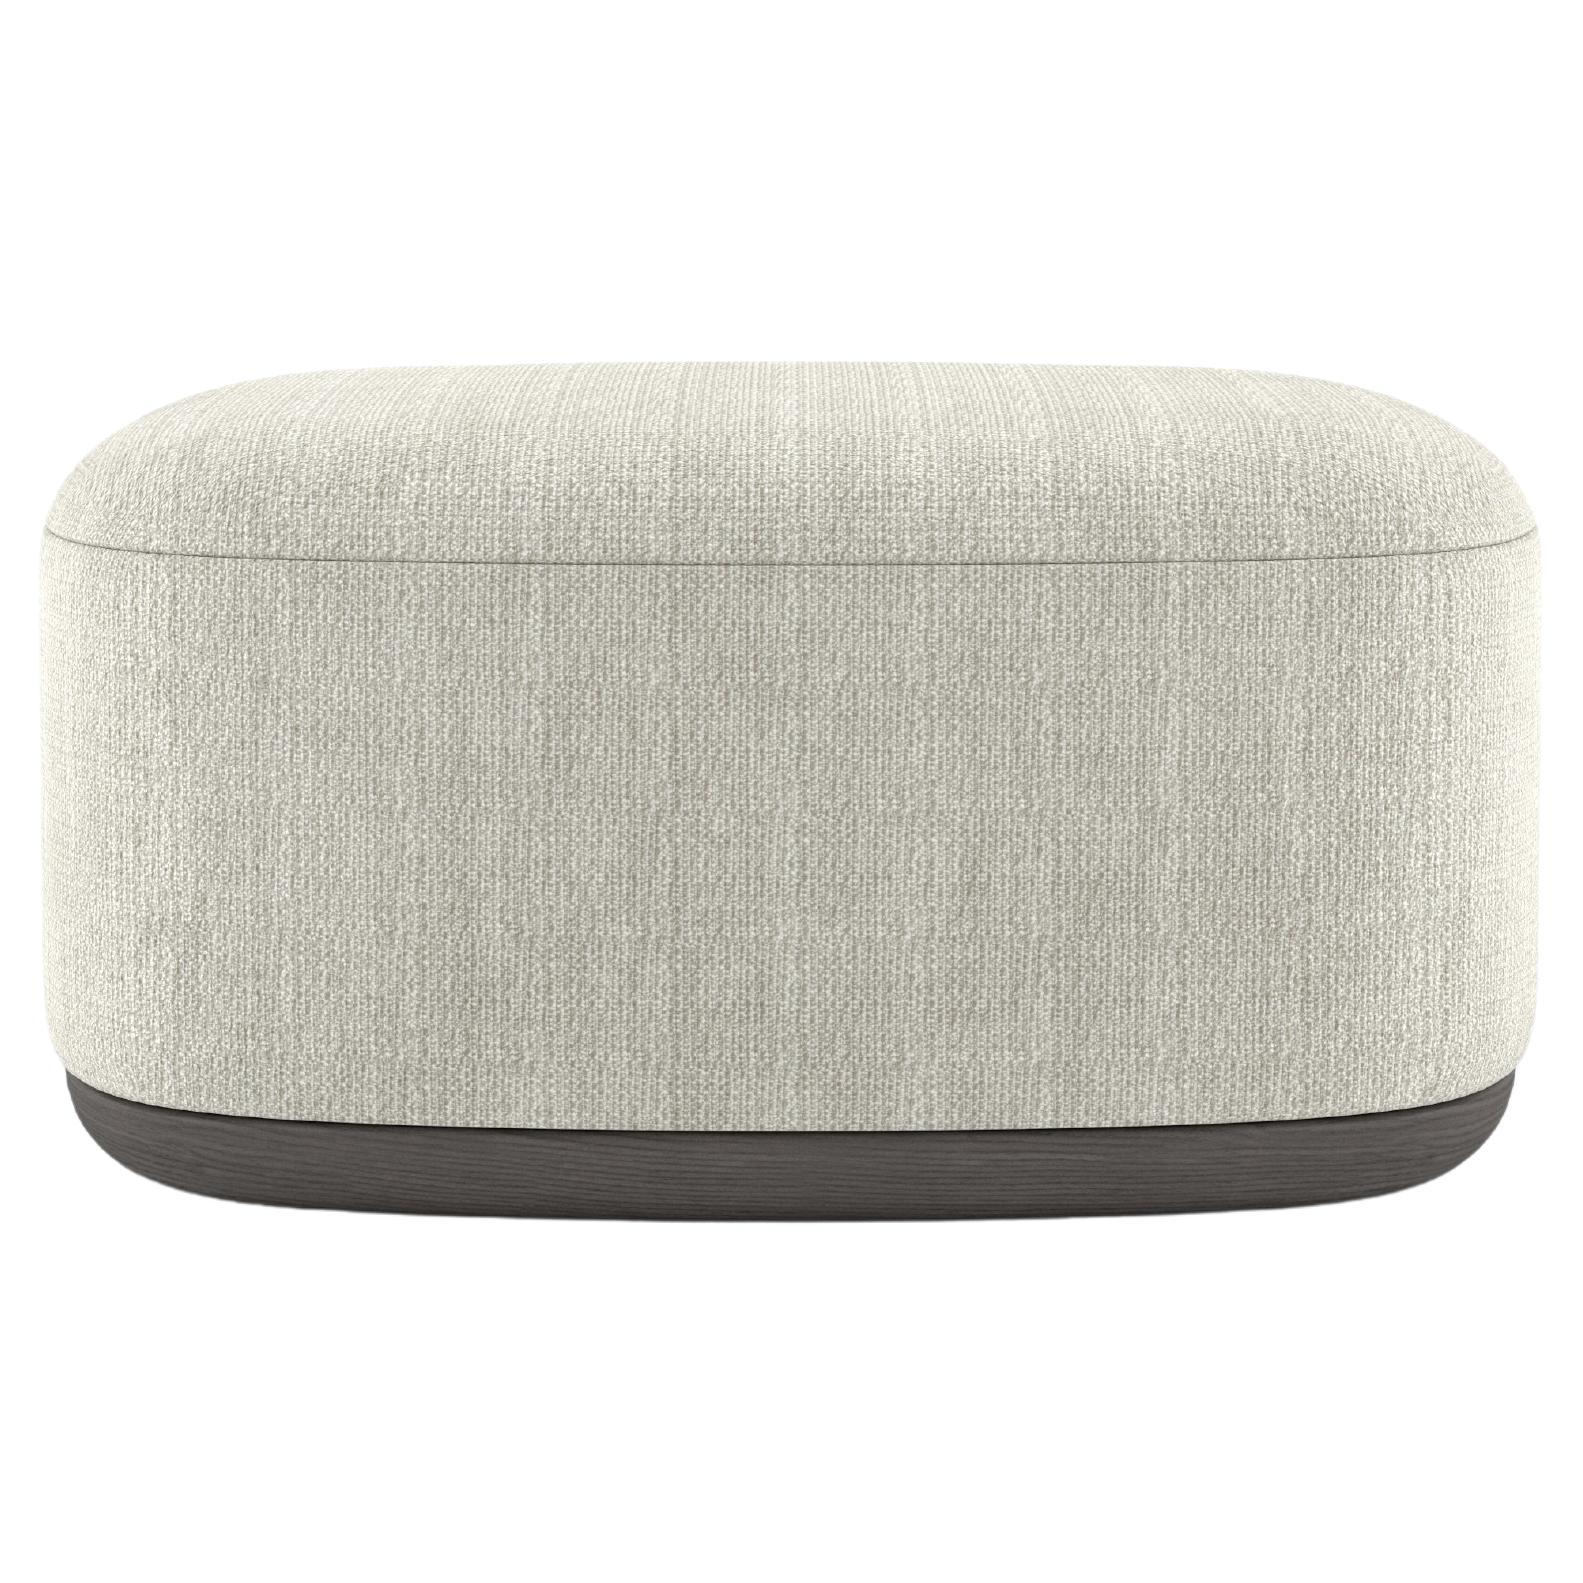 Contemporary Ottoman 'Unio' by Poiat, Fabric Fox 02 by Larsen